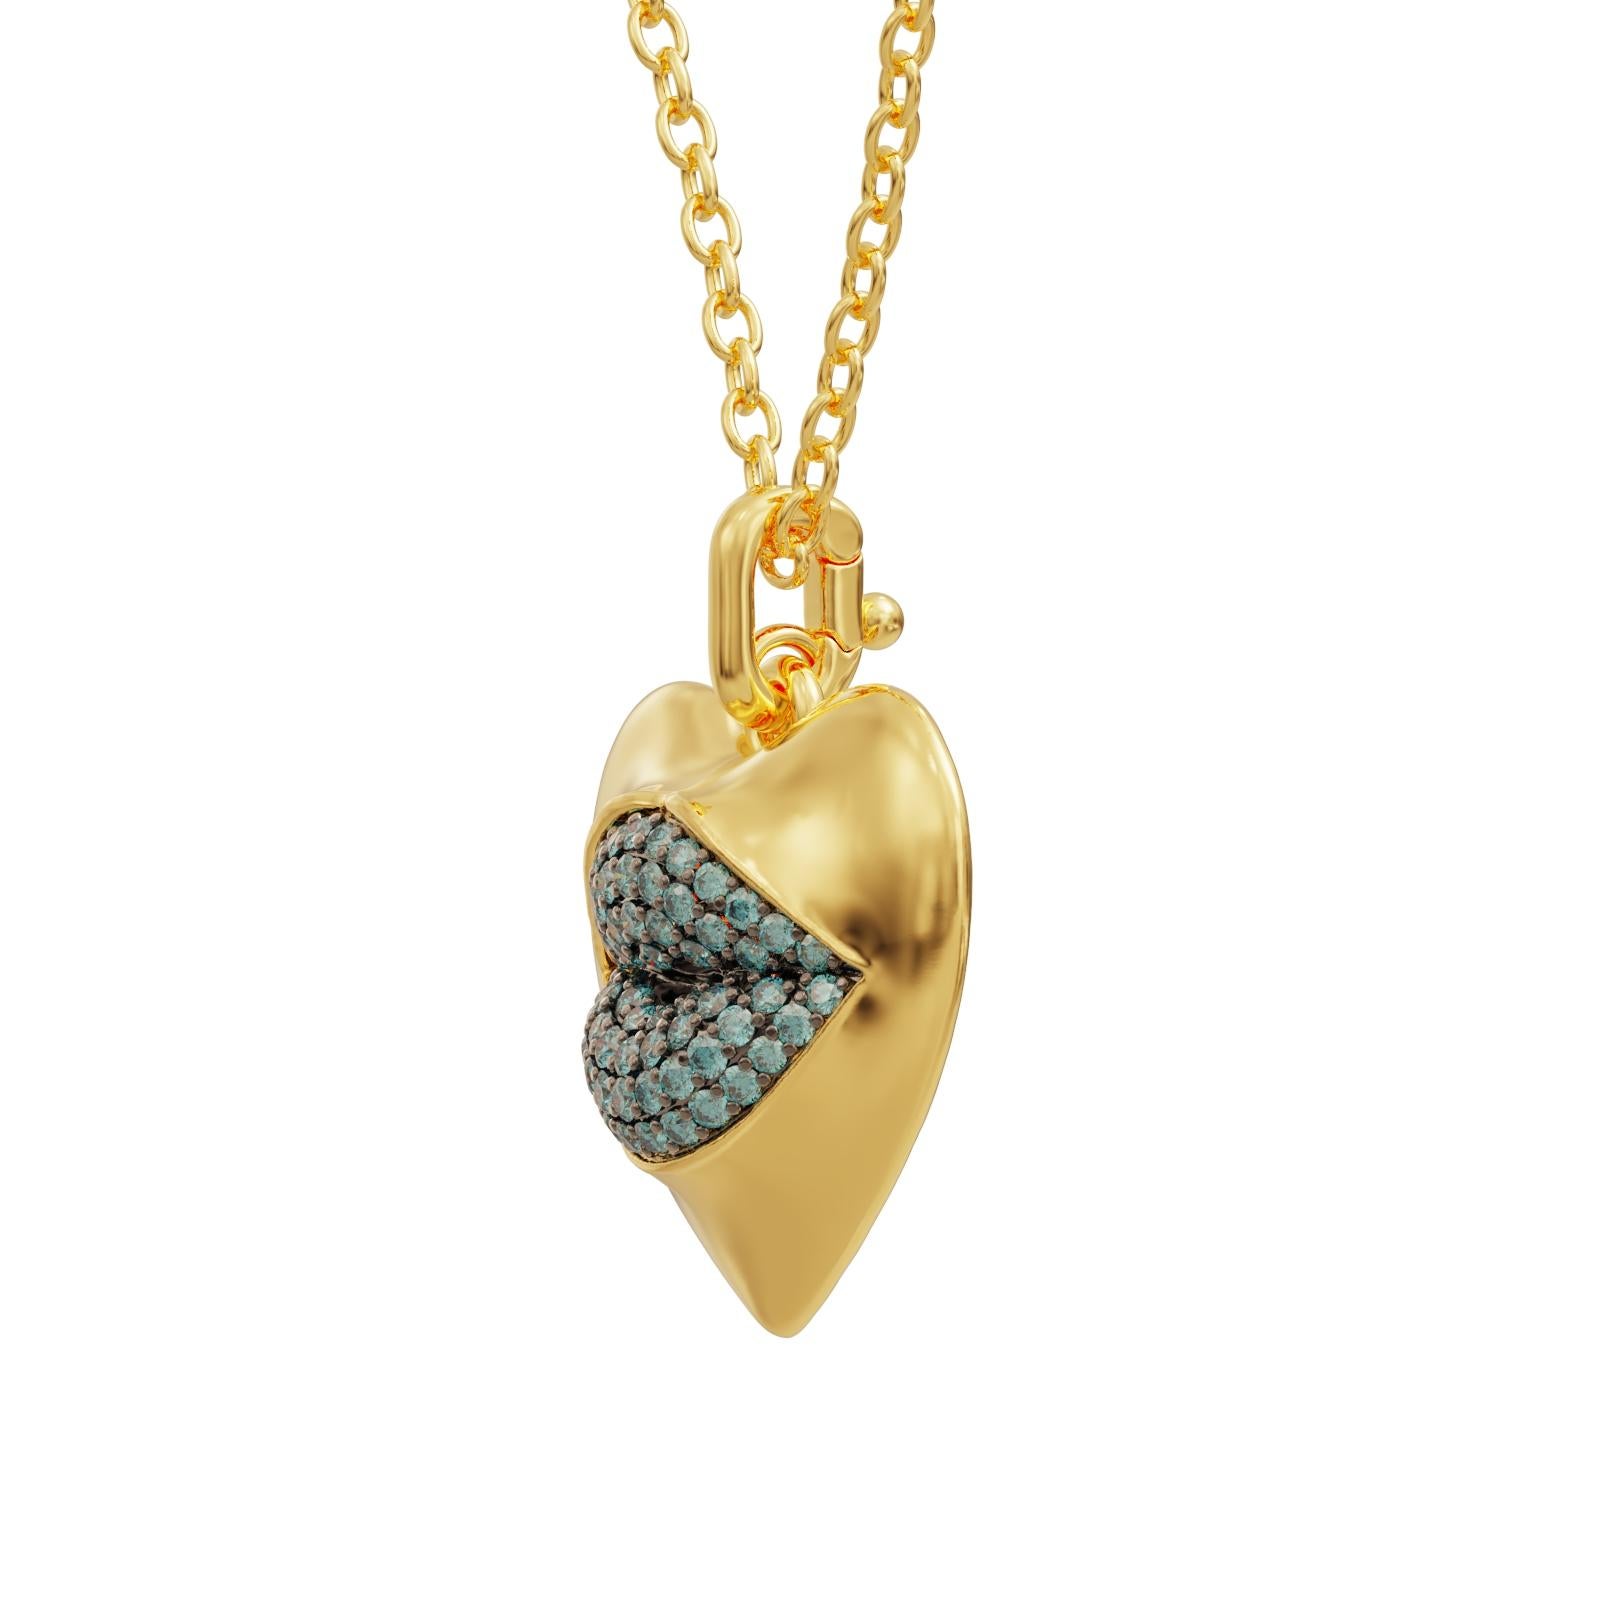 Introducing our stunning gold vermeil heart pendant necklace, a must-have for any fashion-forward woman looking to add a touch of elegance and sophistication to her jewelry collection. Crafted with the finest materials and adorned with a dazzling